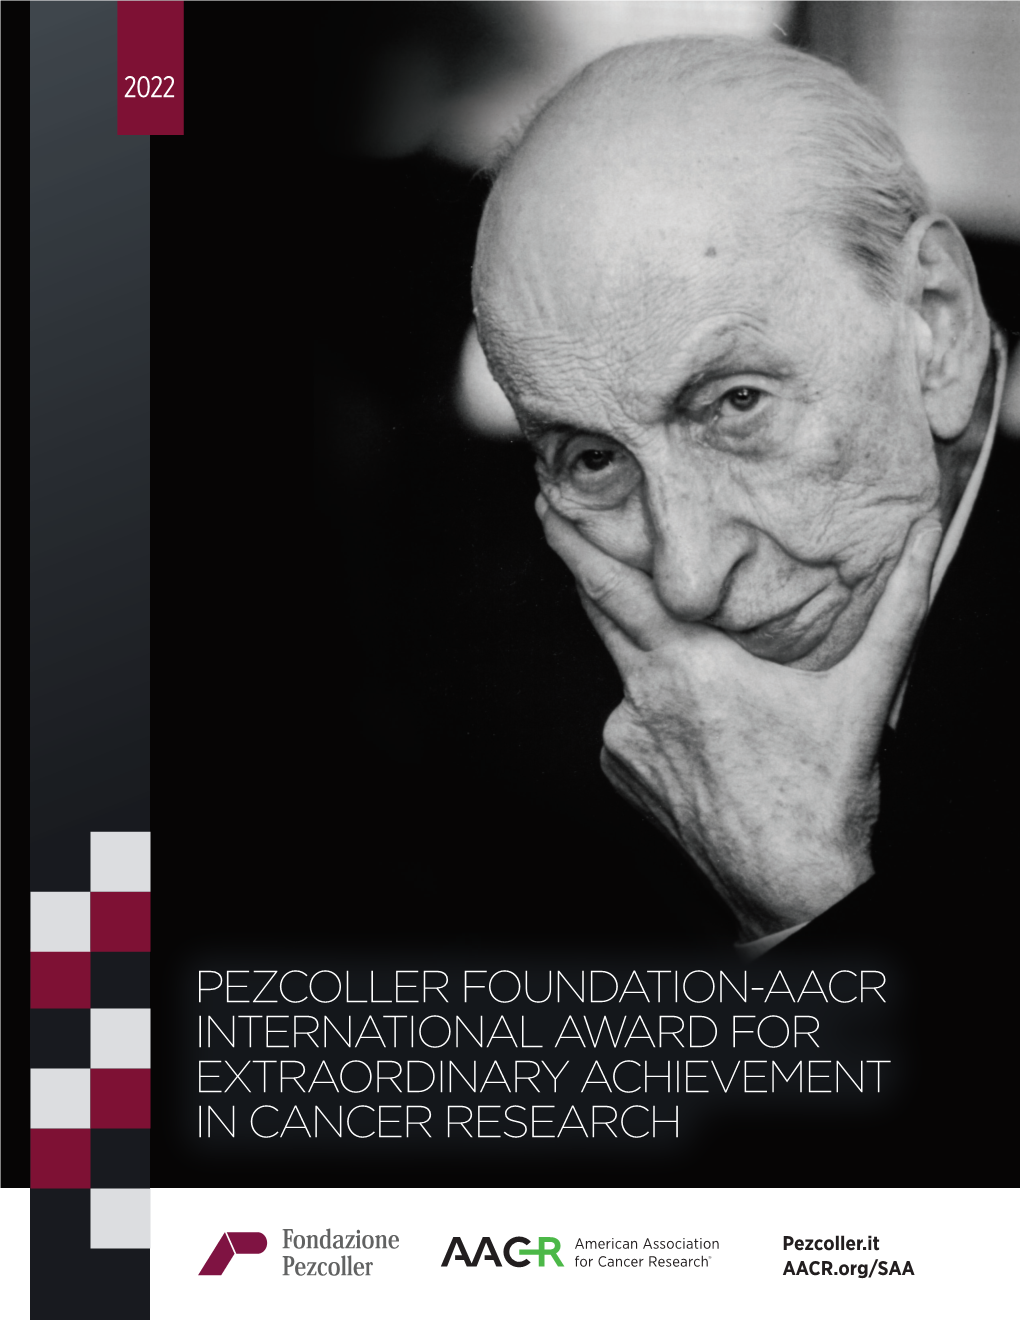 Pezcoller Foundation-Aacr International Award for Extraordinary Achievement in Cancer Research